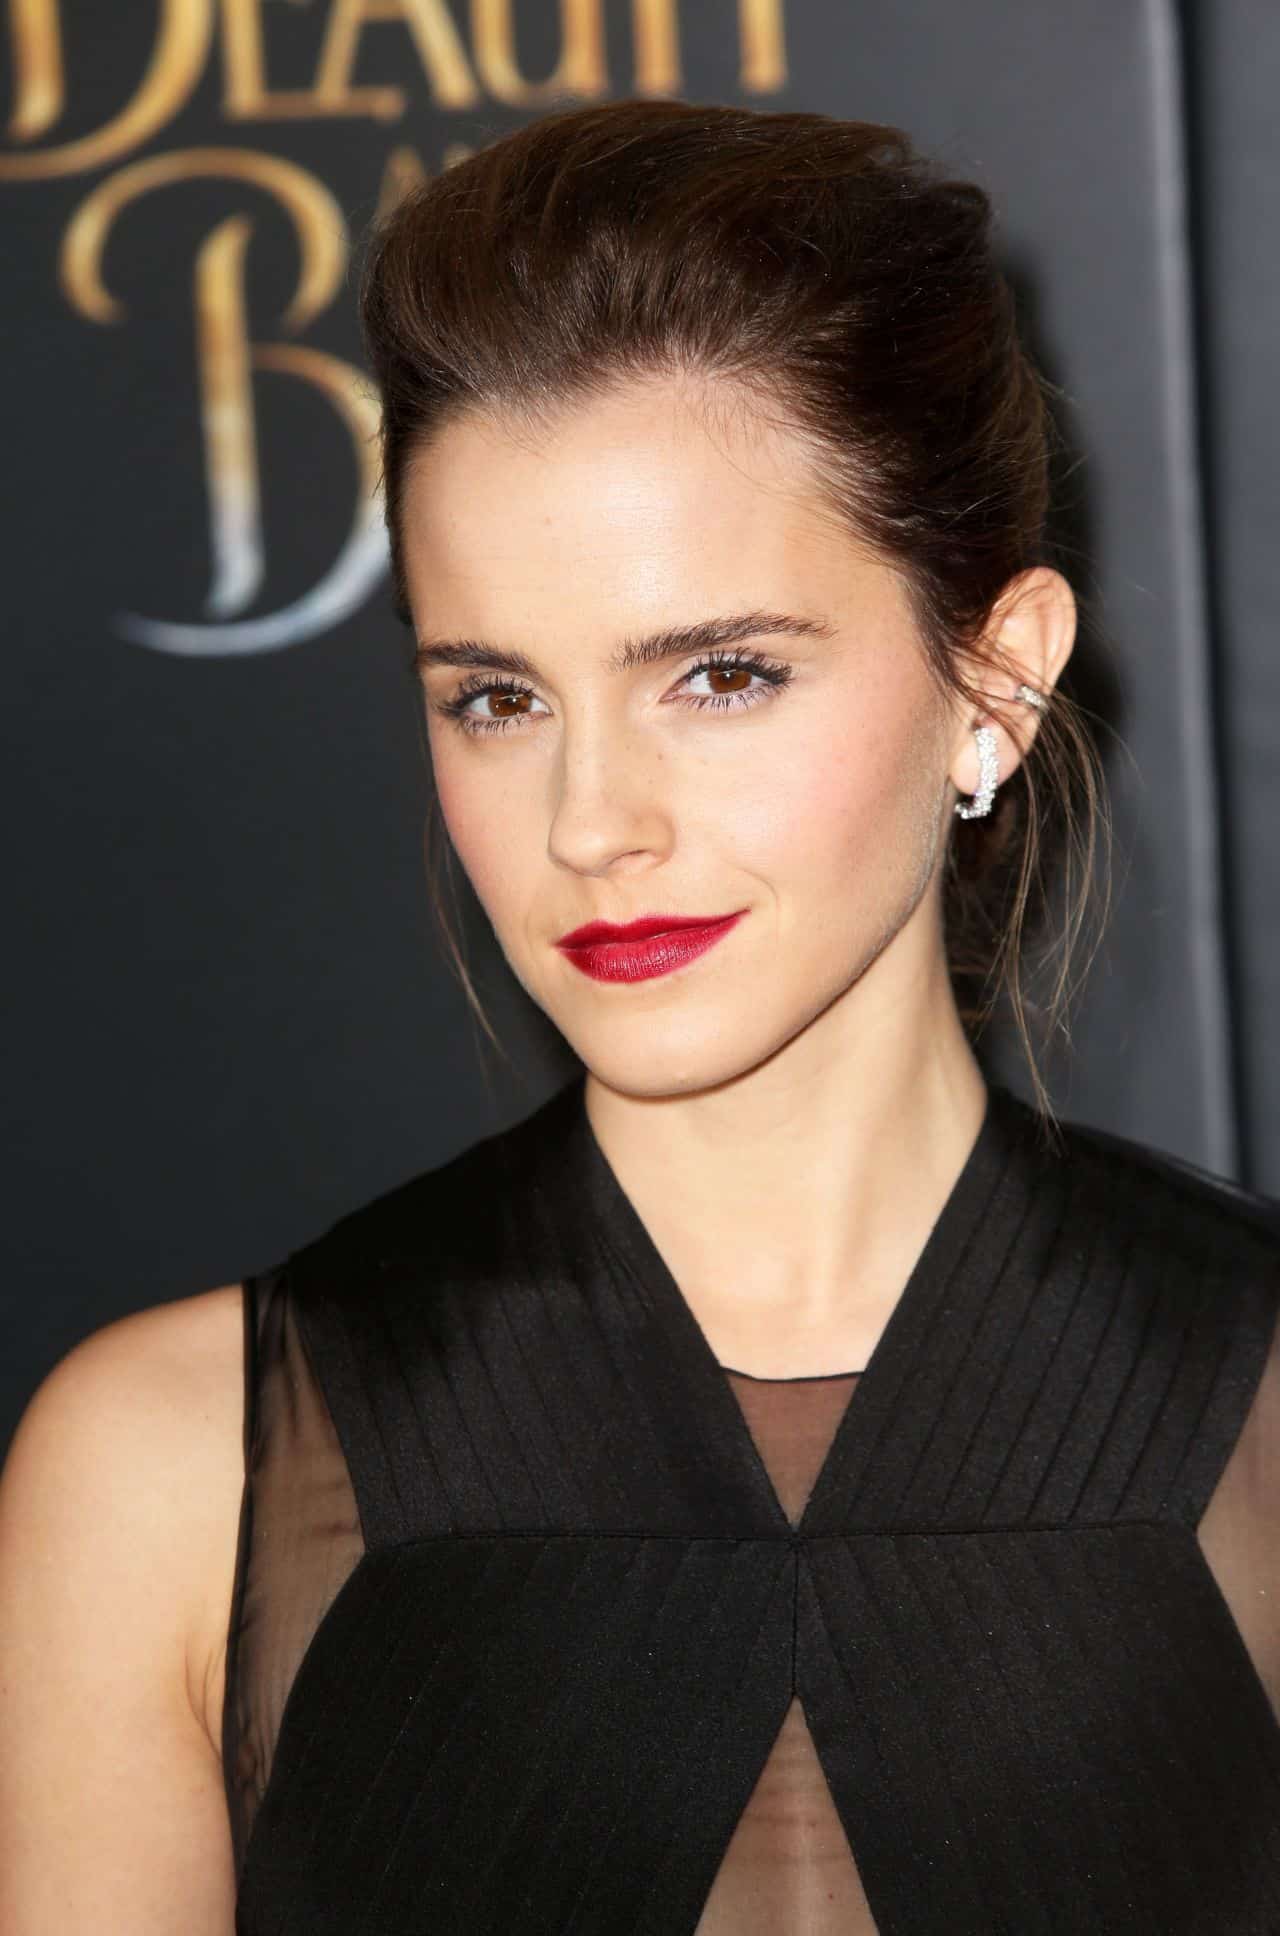 Emma Watson Shows Cleavage at the Premiere of Beauty and the Beast in NY